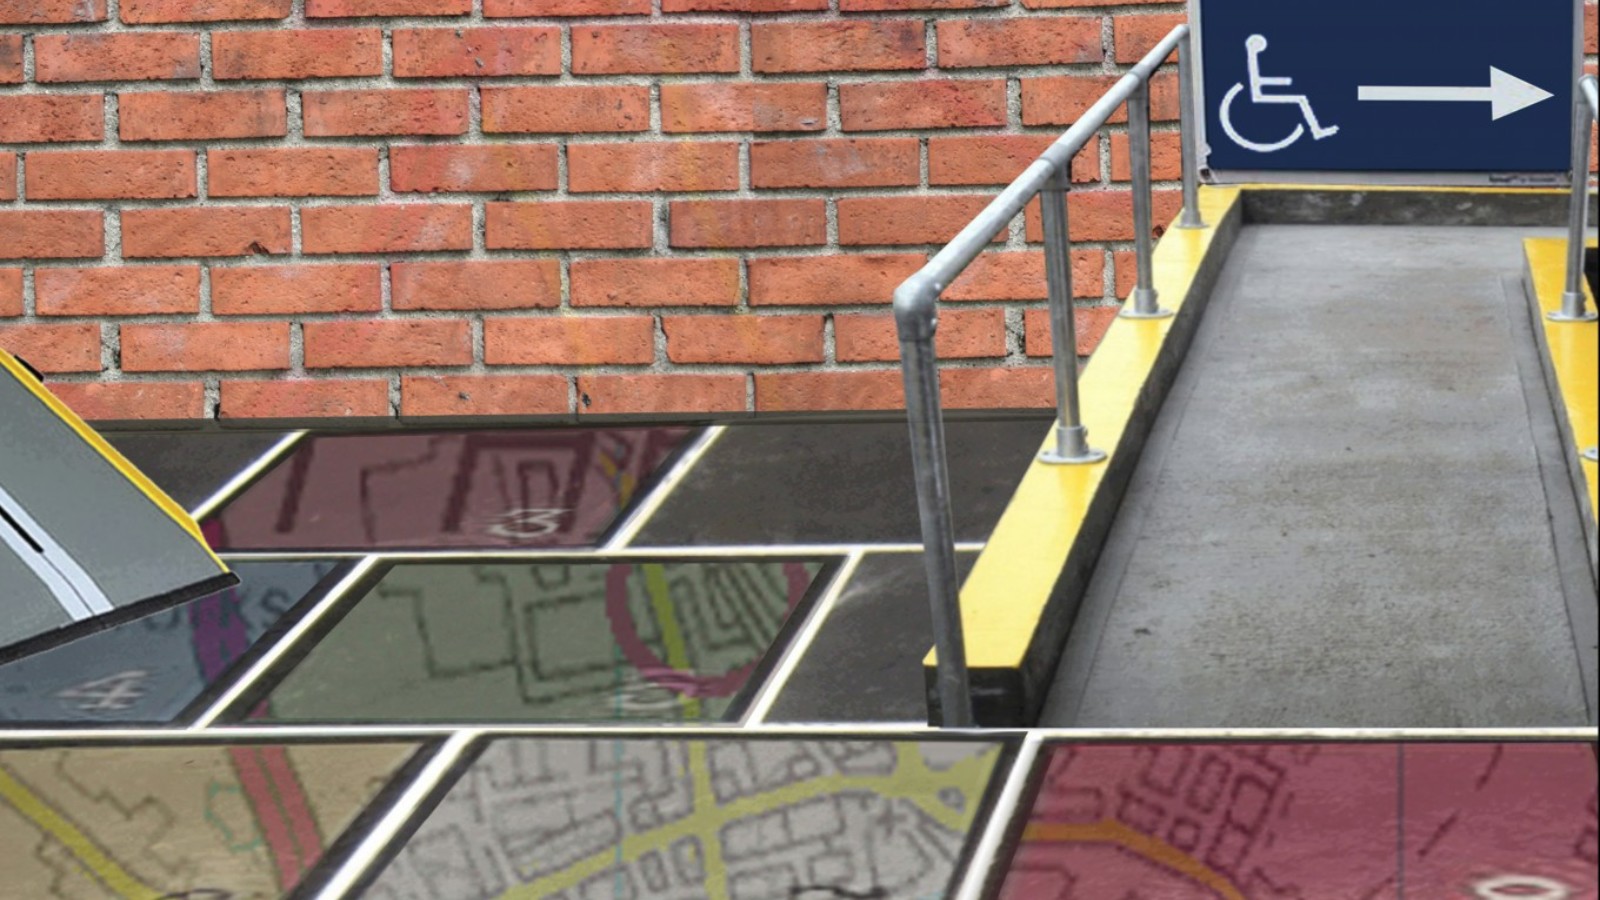 A collage shows a brick wall as a background. A concrete ramp with a wheelchair sign at the top and and arrow pointing to the right. The whole ground is made up of multicoloured, numbered squares like a board game.